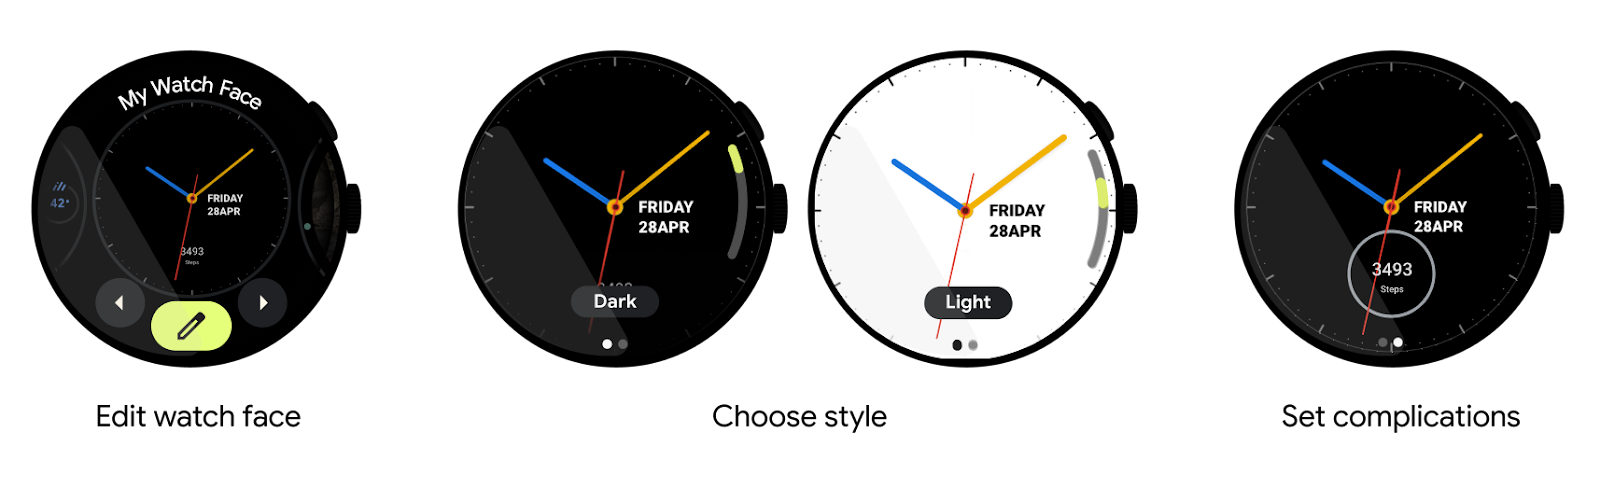 Customizing the watch face with the in-built watch face editor